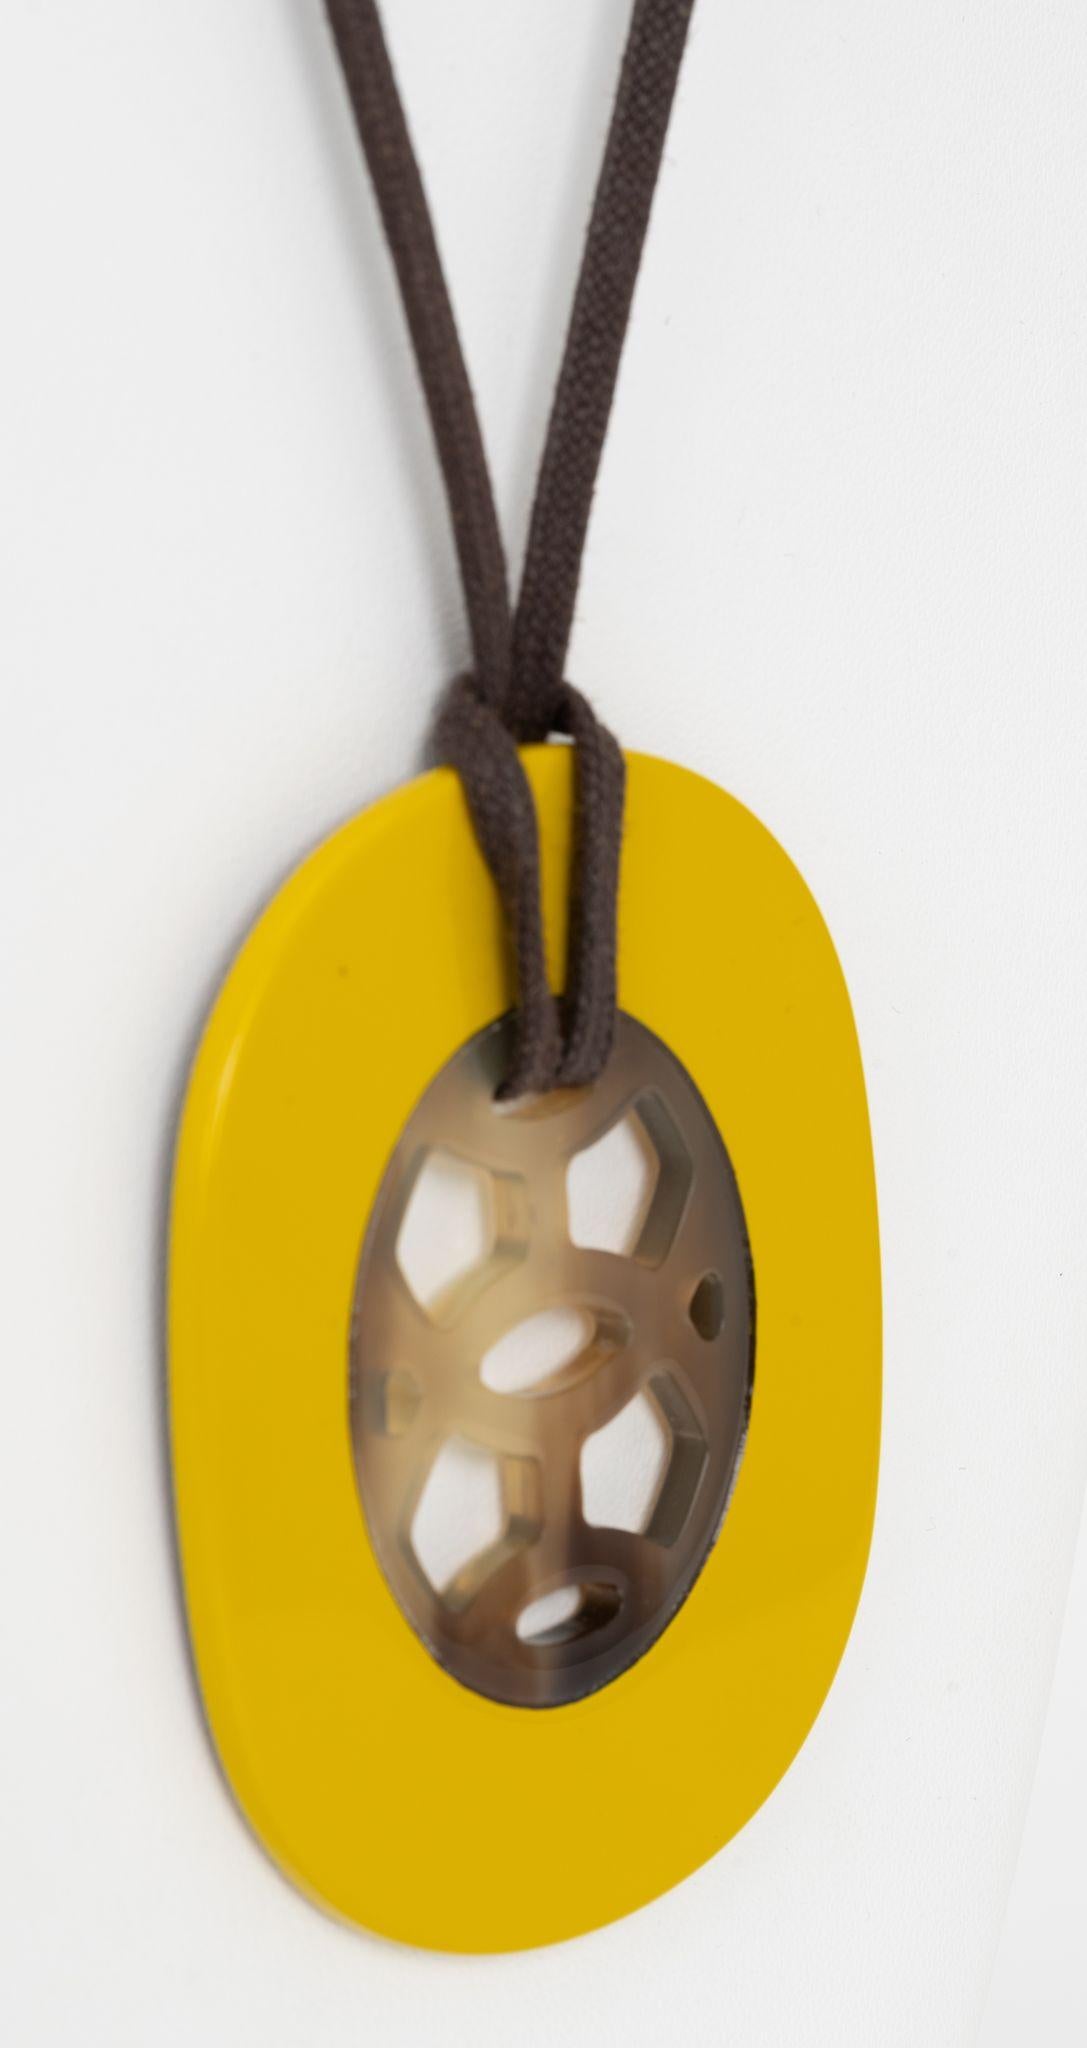 The Hermes Buffalo horn pendant features, lacquered wood on an adjustable waxed cotton cord.
Pendant 2.5